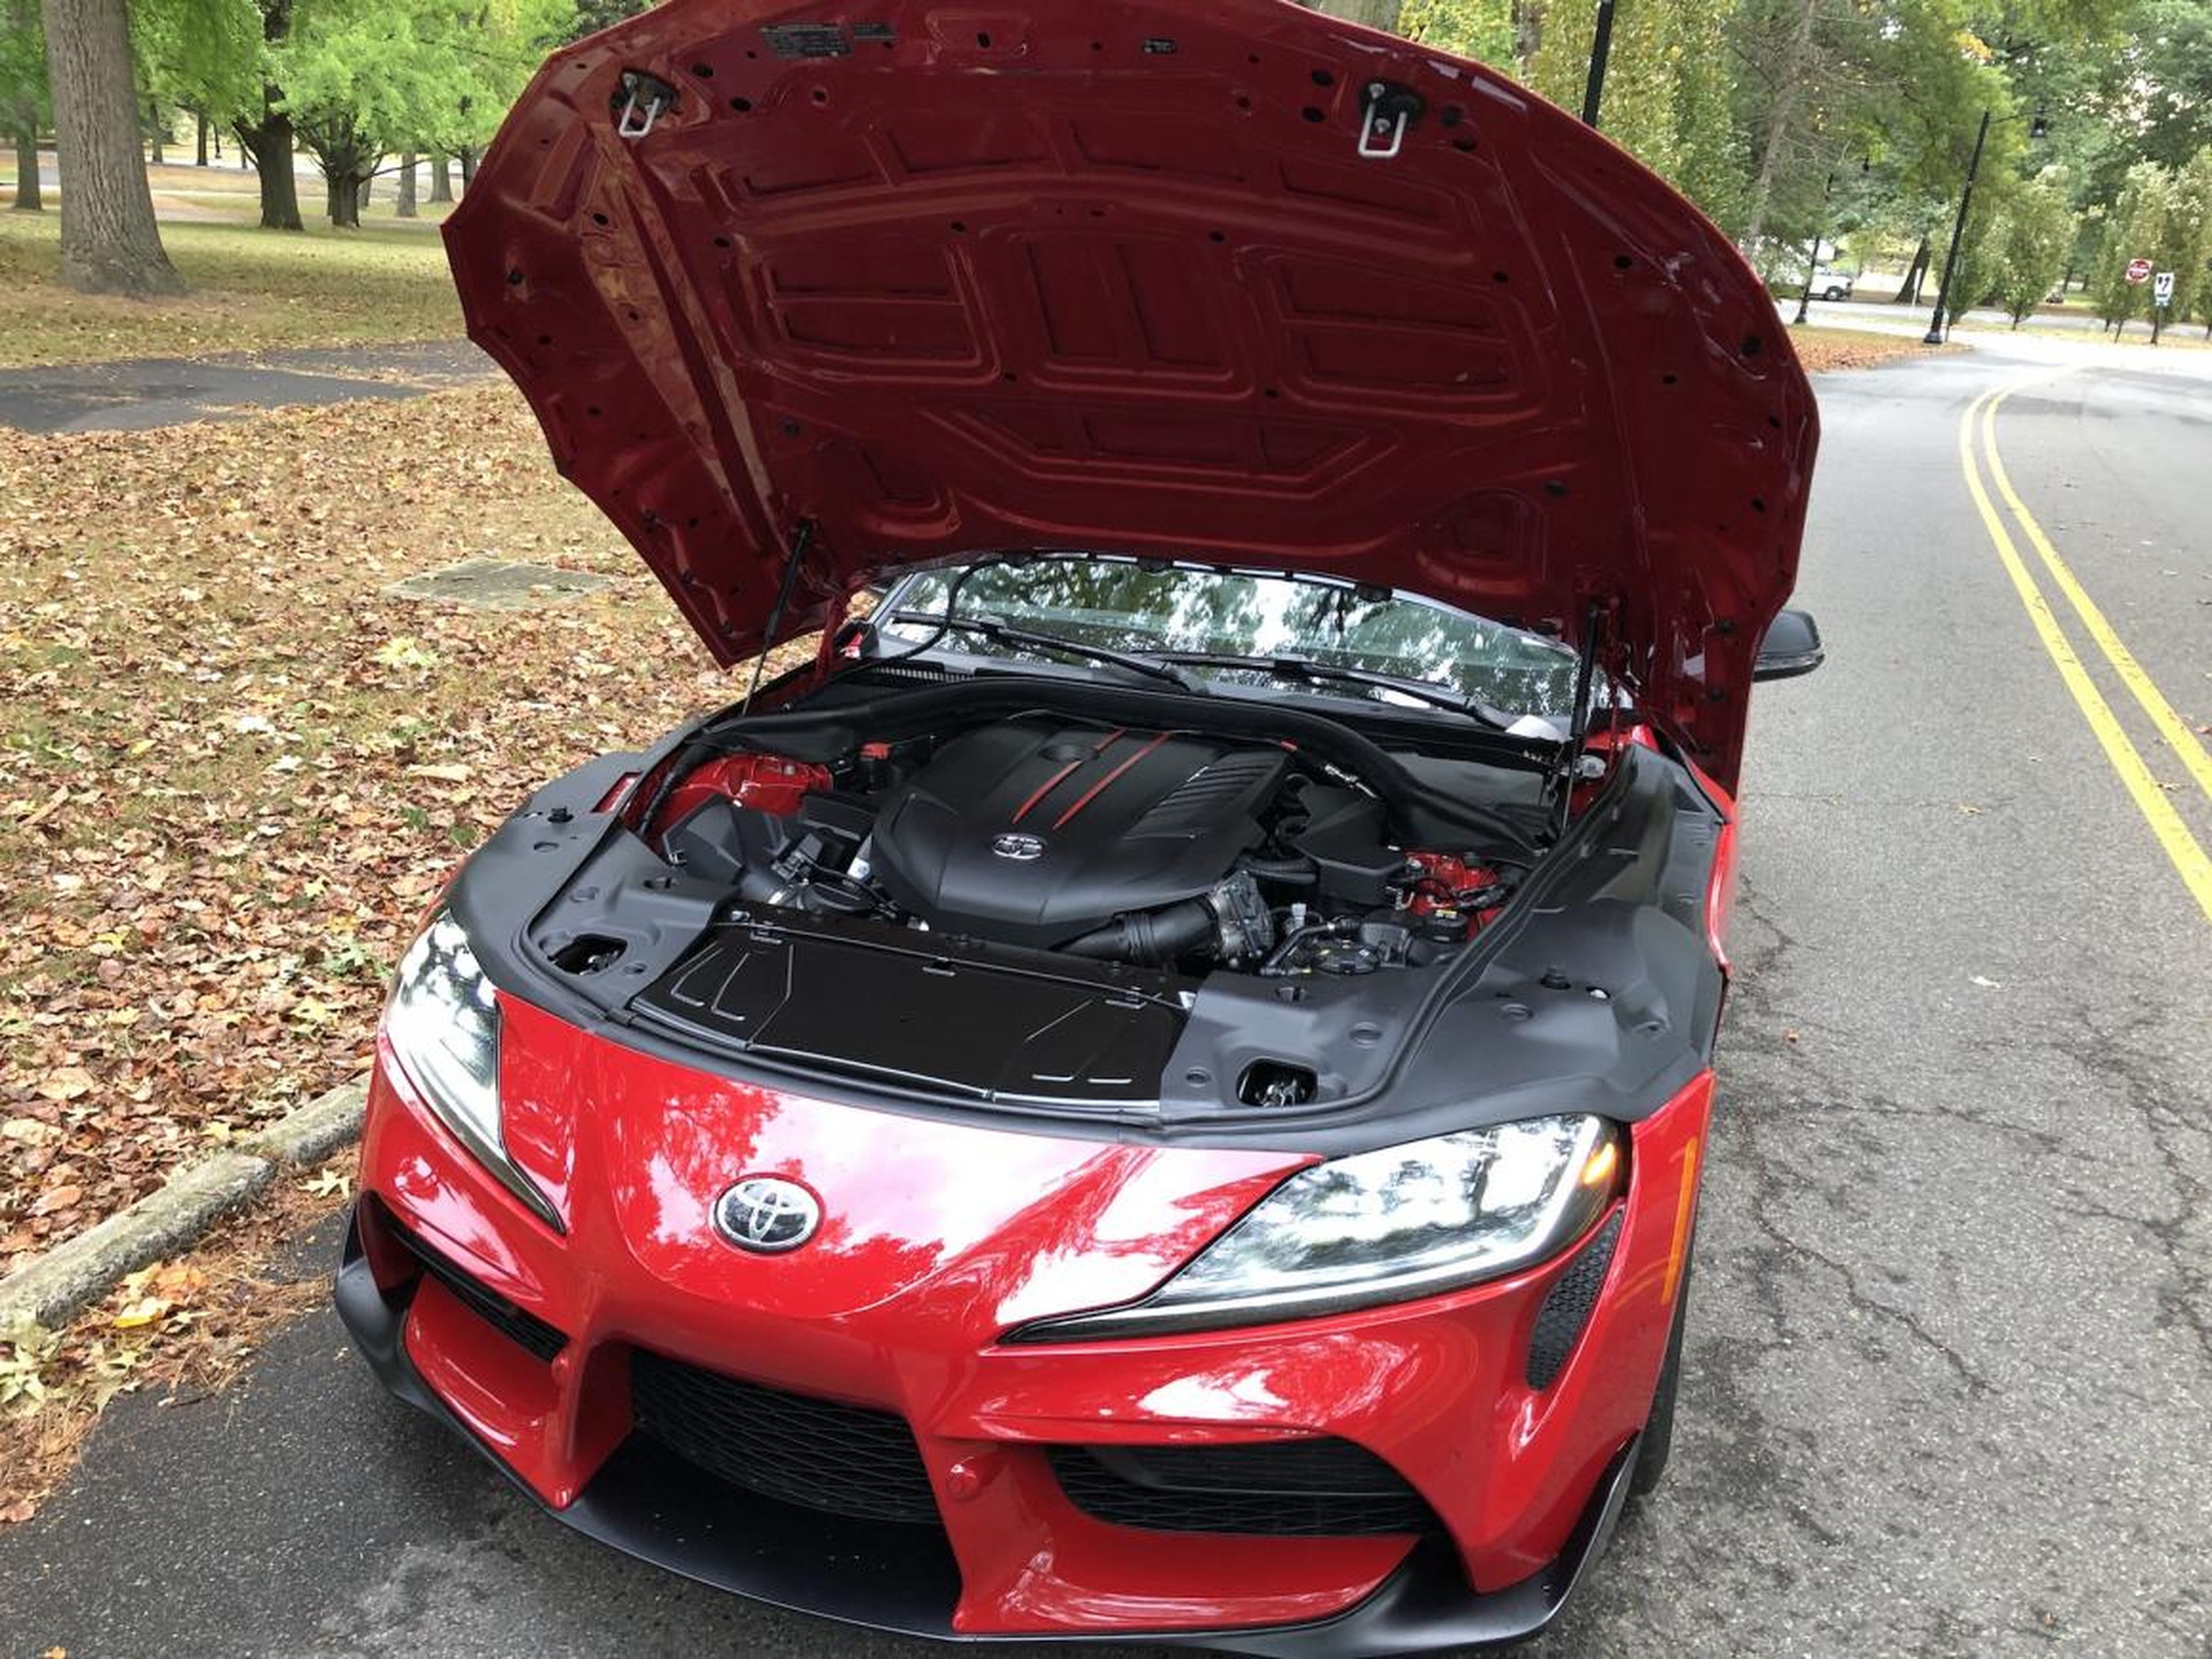 Let's pop the hood and see what makes this Supra go!